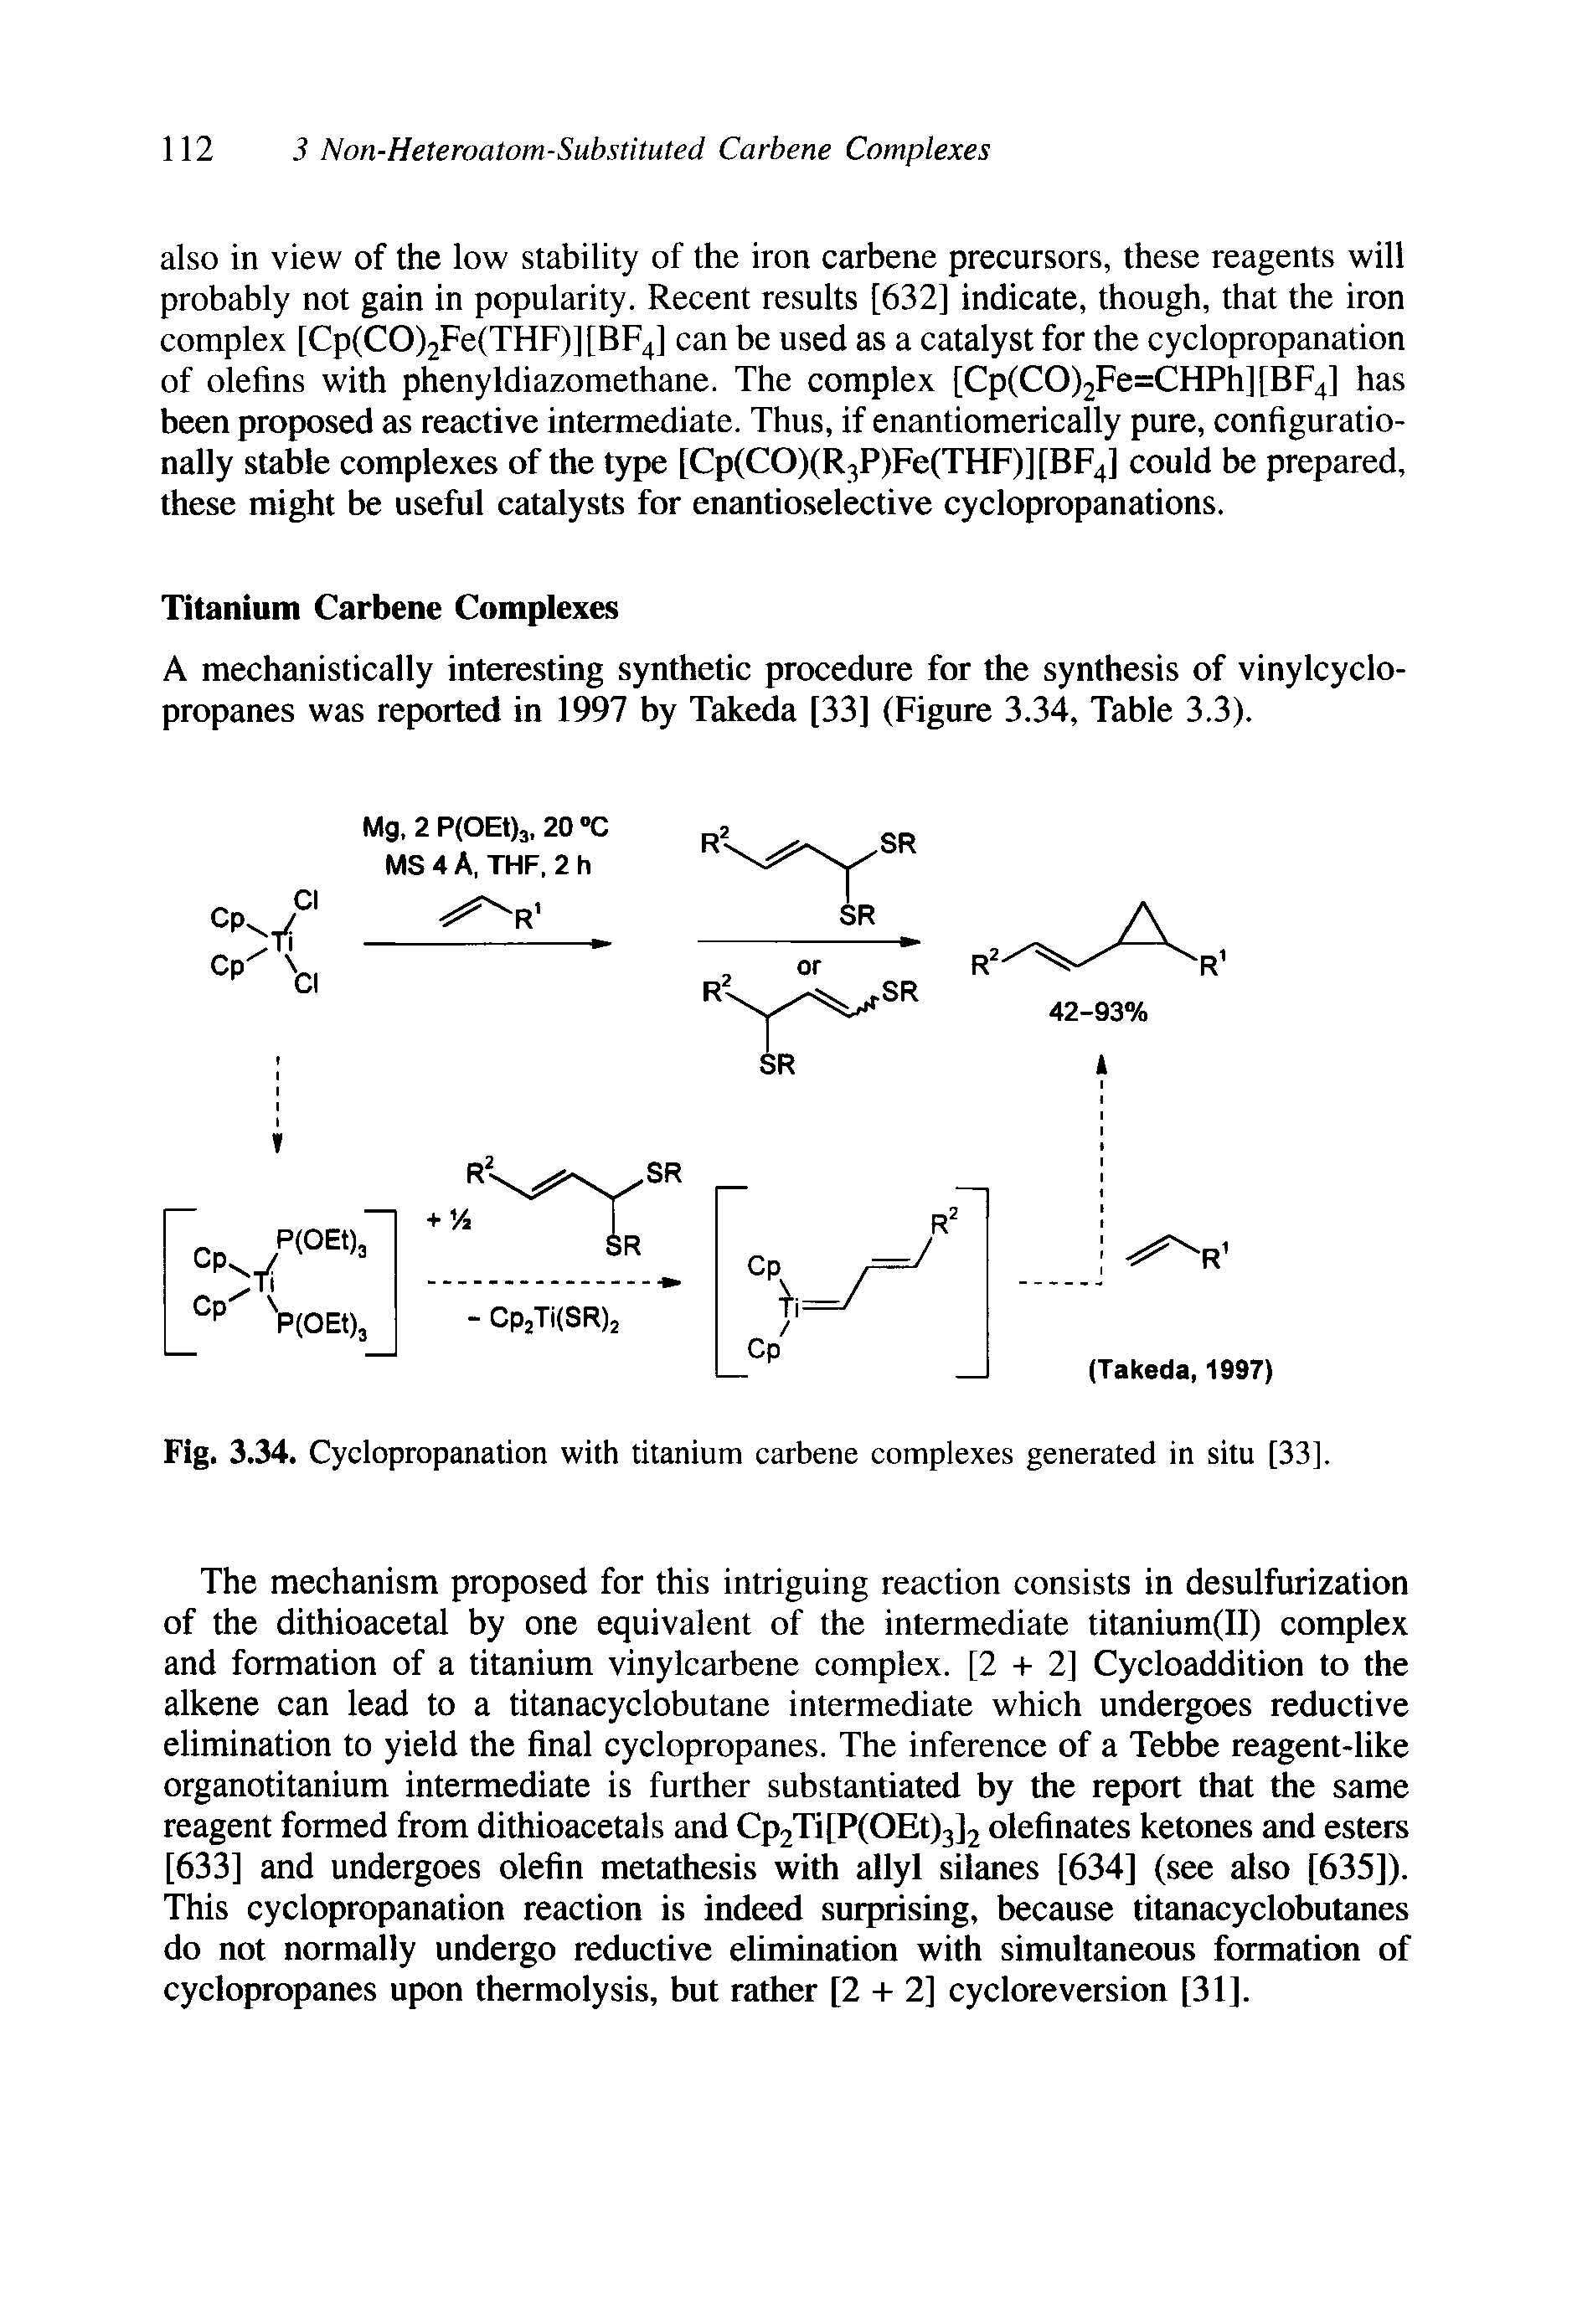 Fig. 3.34. Cyclopropanation with titanium carbene complexes generated in situ [33].